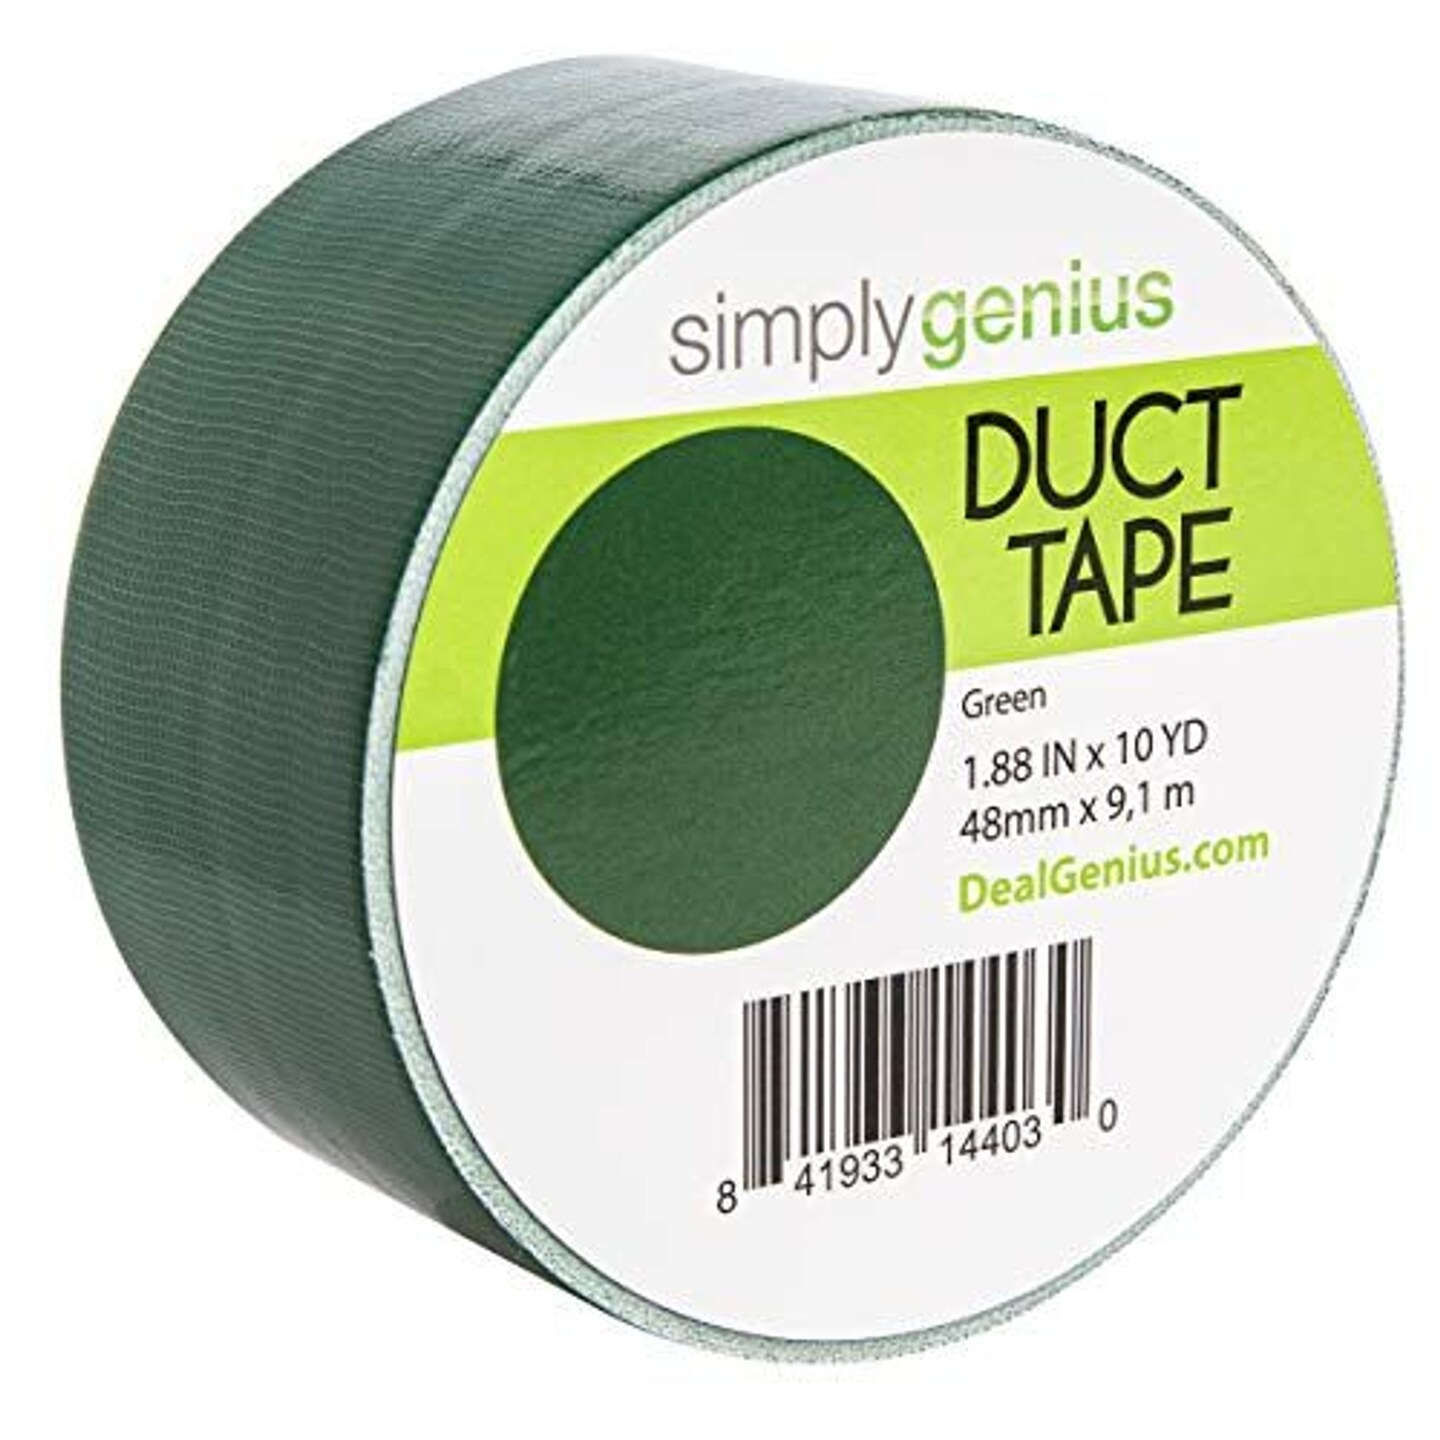 Simply Genius Art &#x26; Craft Duct Tape Heavy Duty - Craft Supplies for Kids &#x26; Adults - Colored Duct Tape - 1.8 in x 10 yards - Colorful Tape for DIY, Craft &#x26; Home Improvement (Green, Single roll)